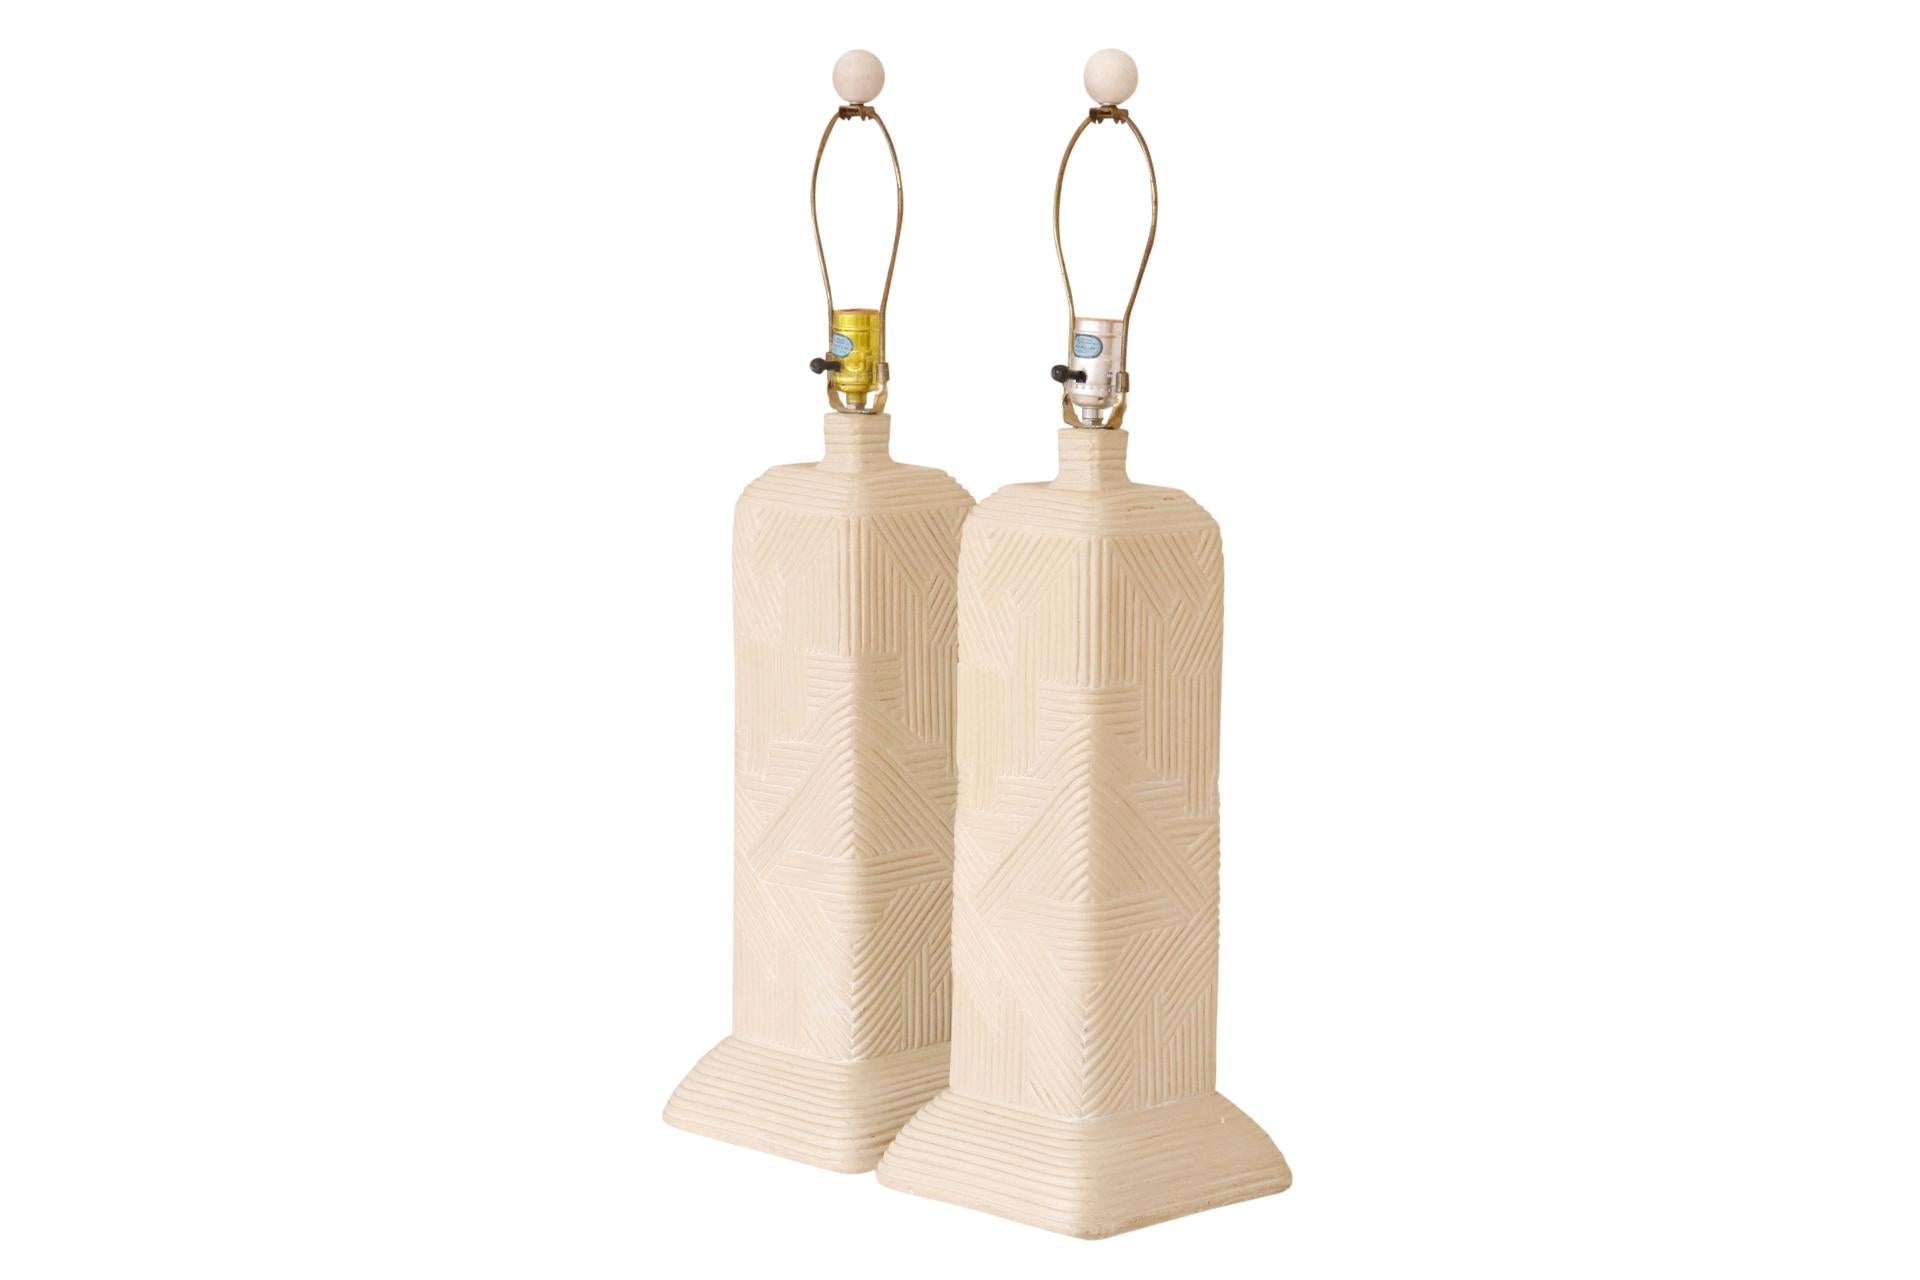 A pair of sculptural table lamps with a southwestern style. Made of plaster and cast with geometric lines that give the look of pencil-wood bamboo. Harps are topped with ball finials. Each lamp measures 22.5